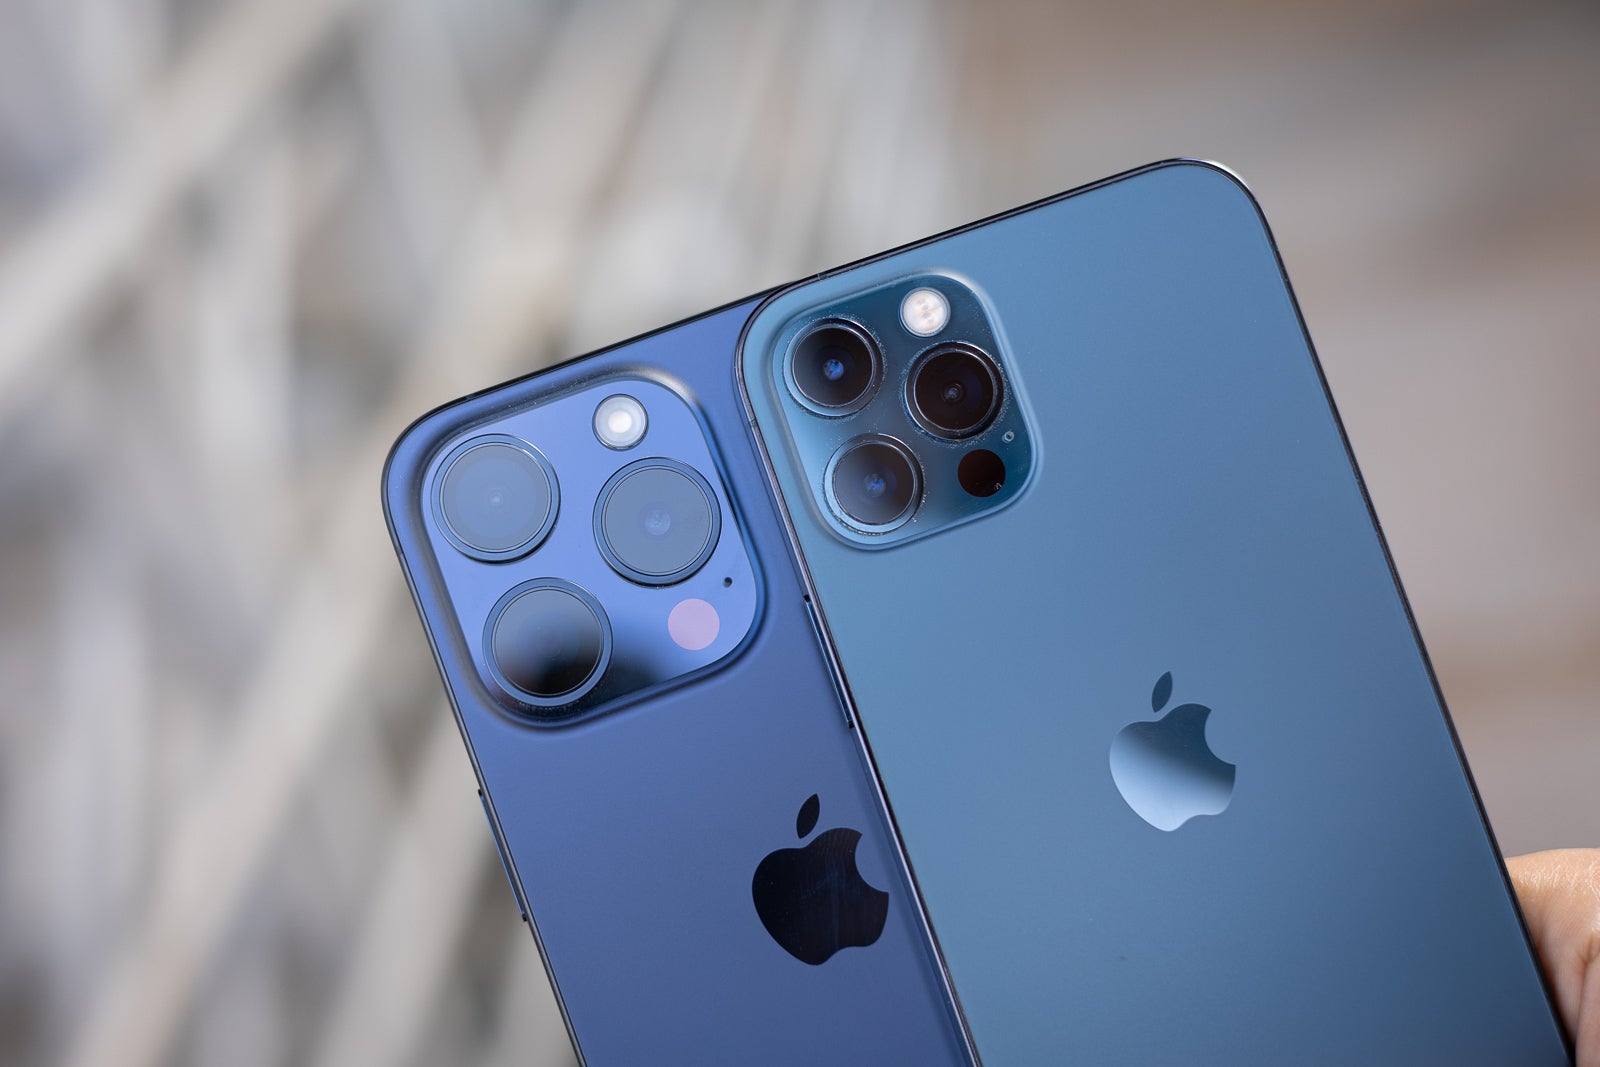 iPhone 11 Pro, iPhone 12 Pro user? Time to upgrade to iPhone 15